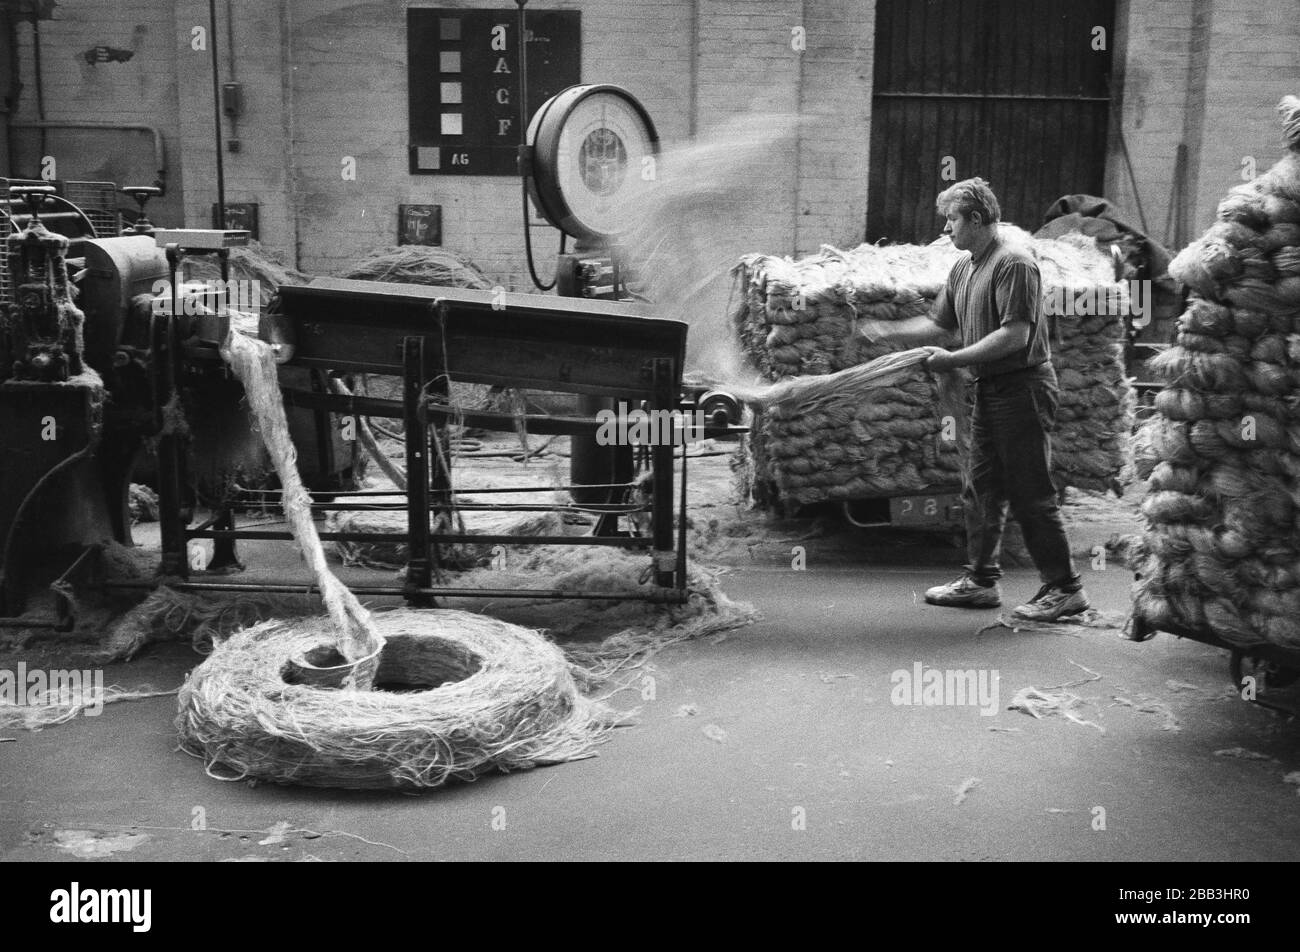 A worker feeding jute into a machine at Tay Spinners mill in Dundee, Scotland. This factory was the last jute spinning mill in Europe when it closed for the final time in 1998. The city of Dundee had been famous throughout history for the three 'Js' - jute, jam and journalism. Stock Photo